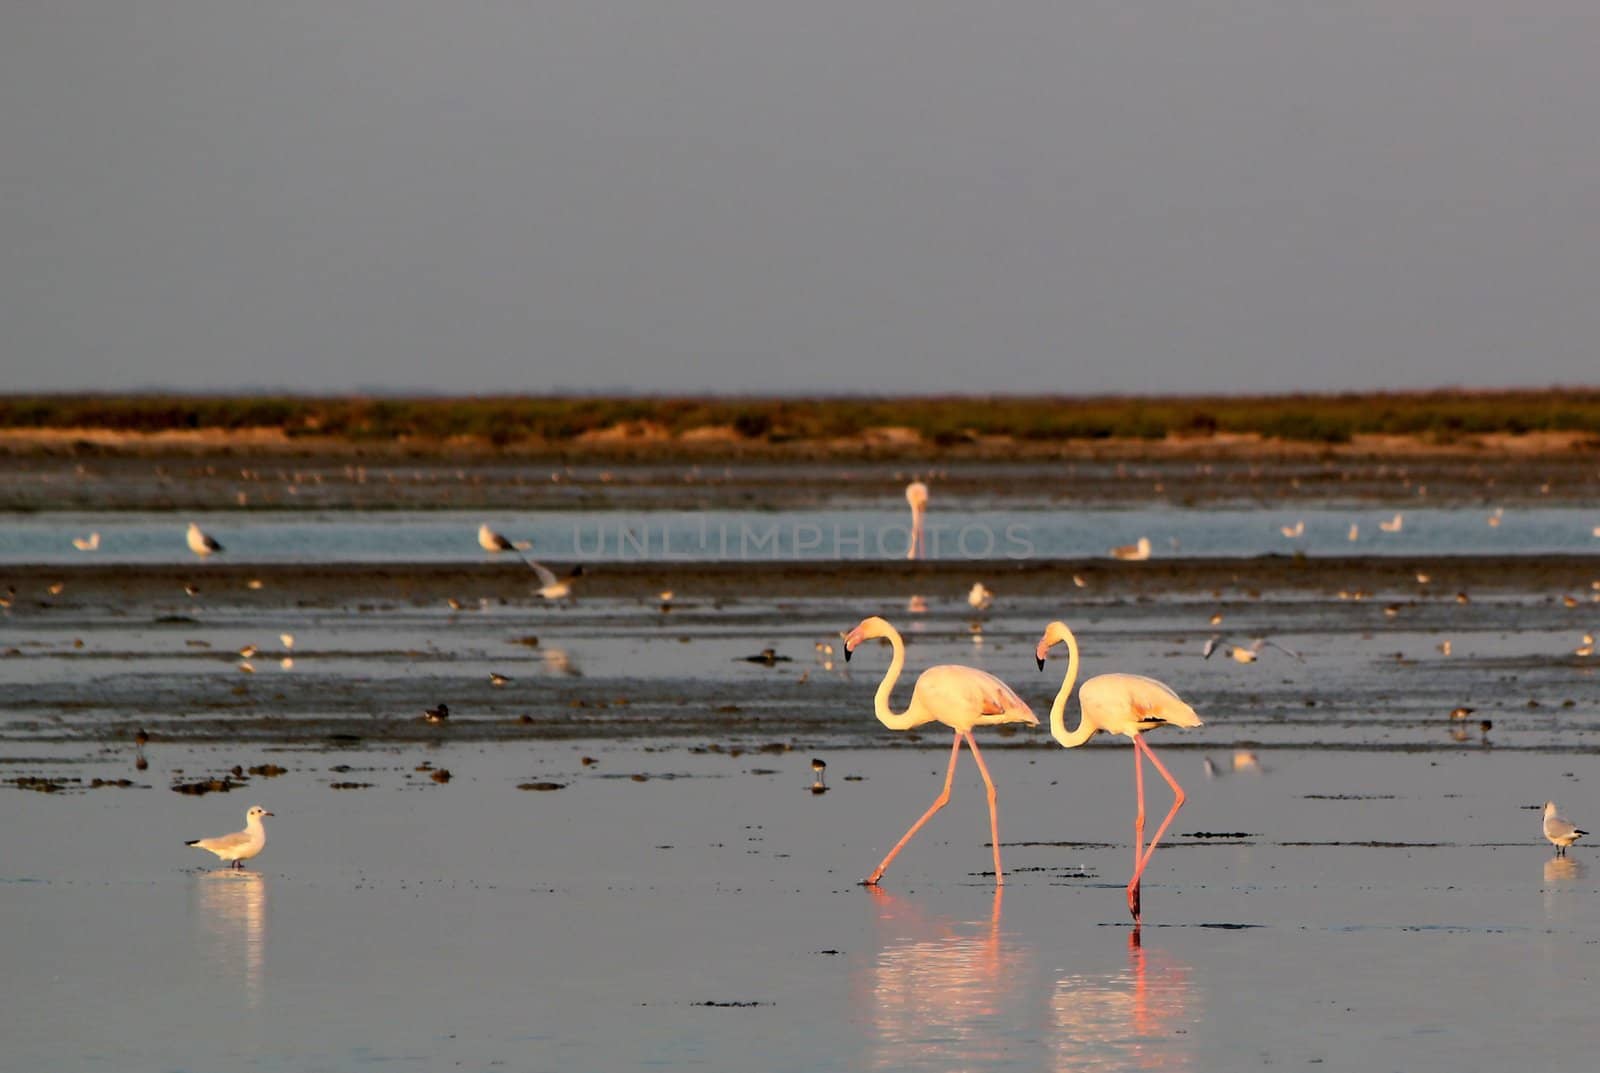 Flamingos walking in the water by Elenaphotos21